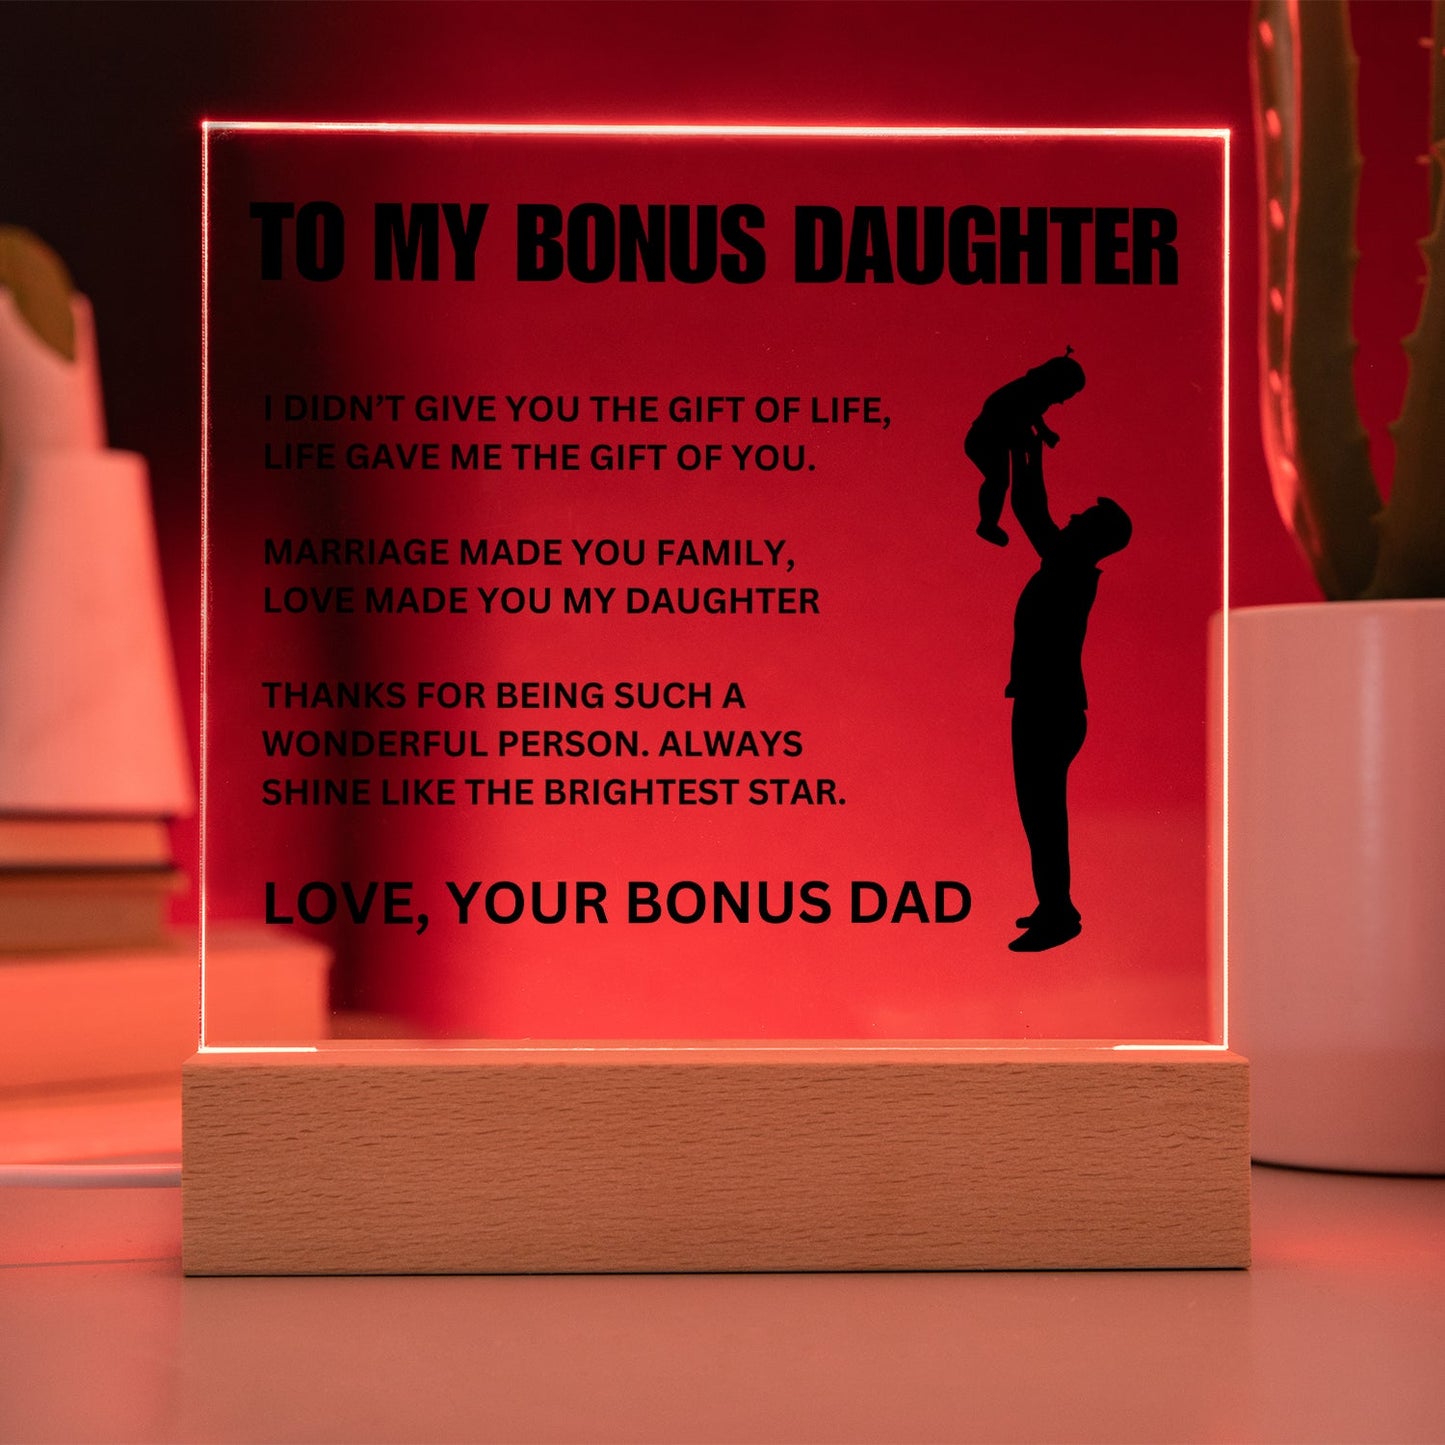 To My Bonus Daughter | "Gift of You" | Acrylic LED Lamp